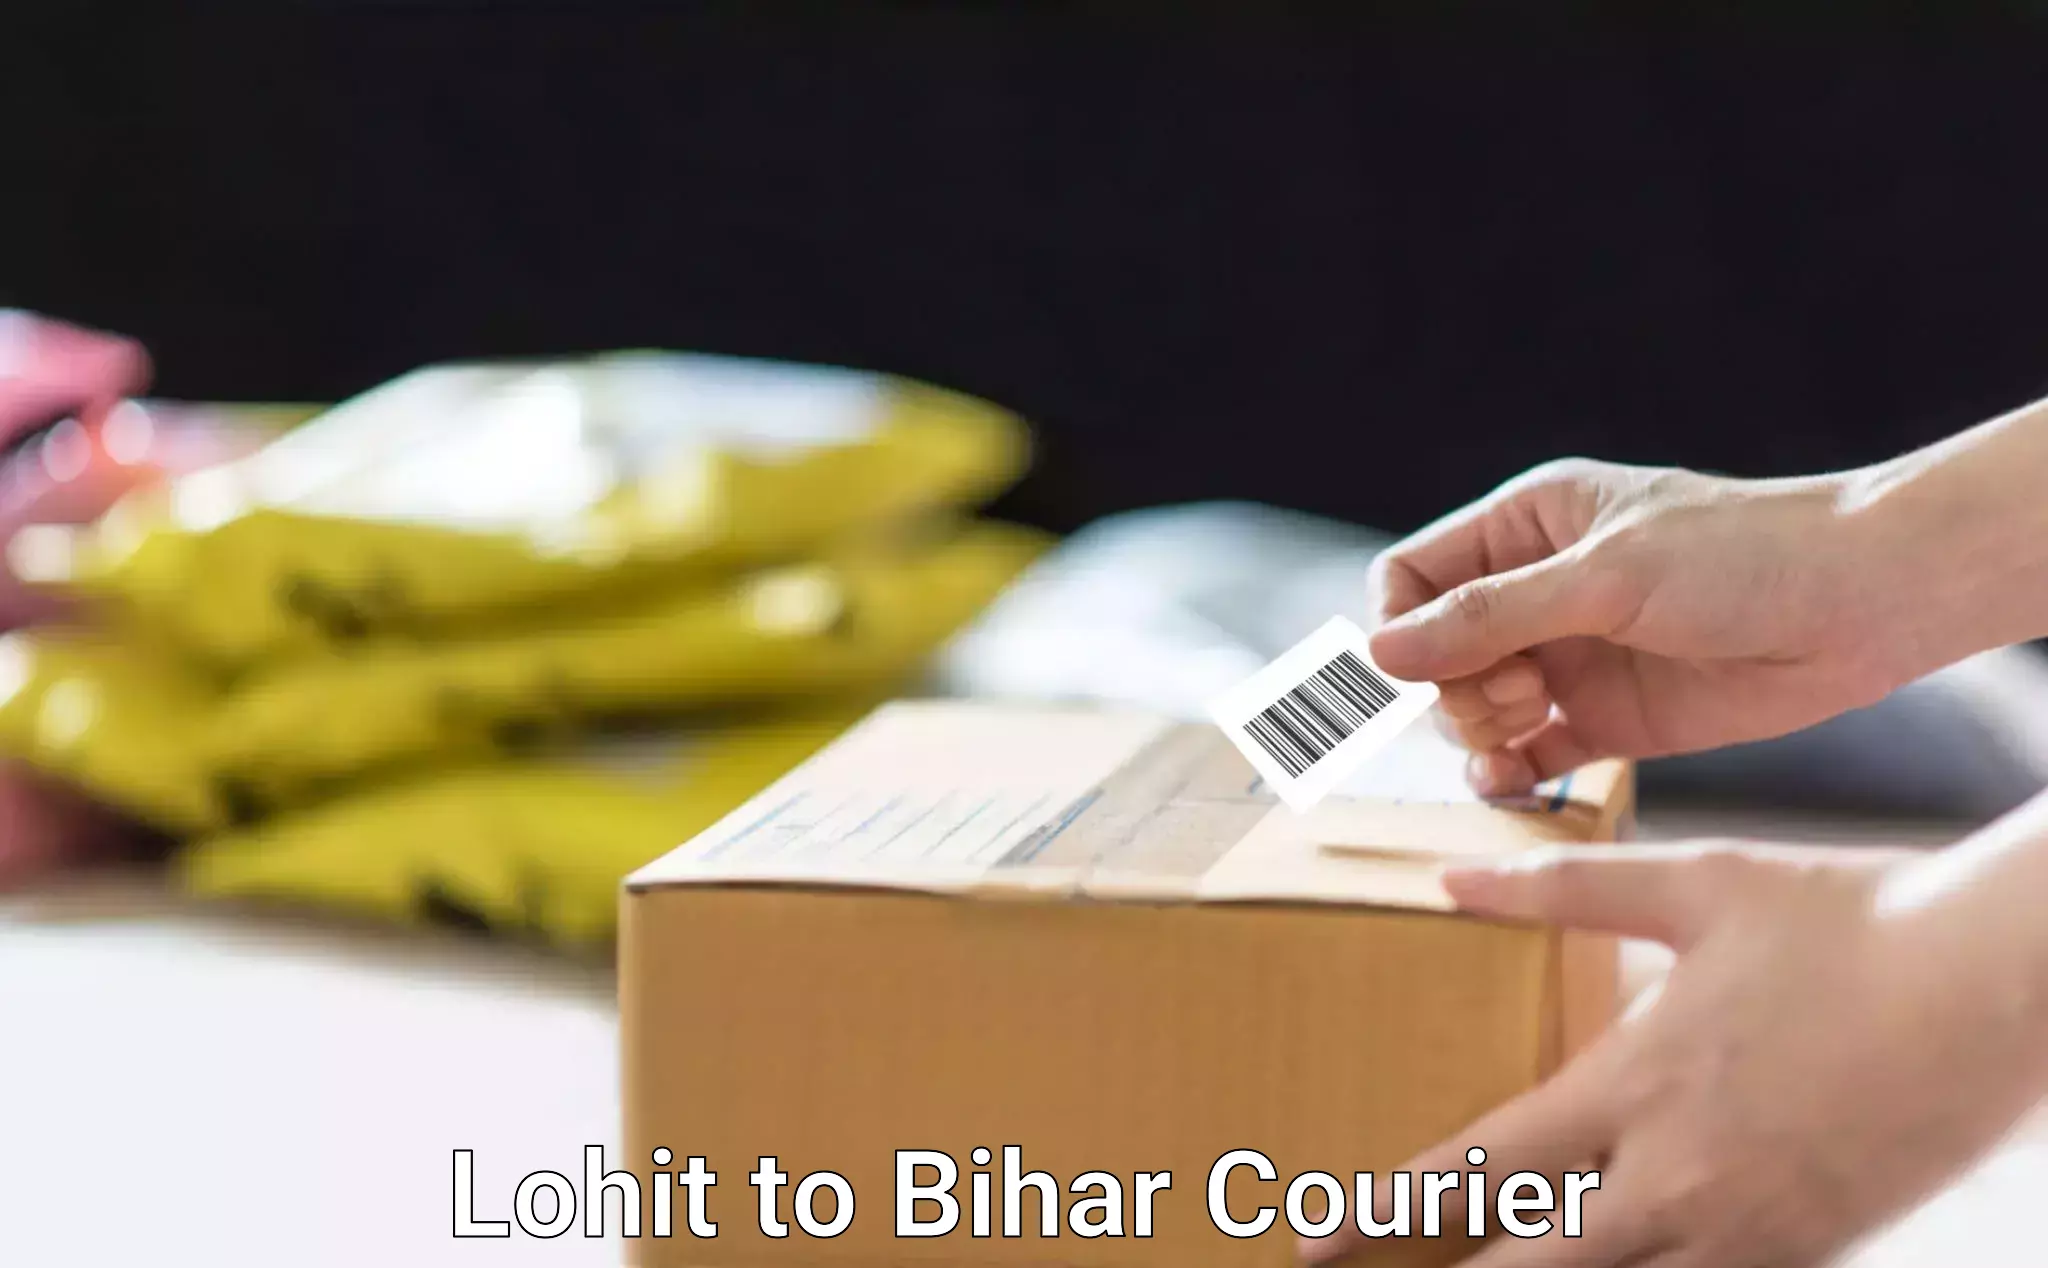 Secure freight services Lohit to Bihar